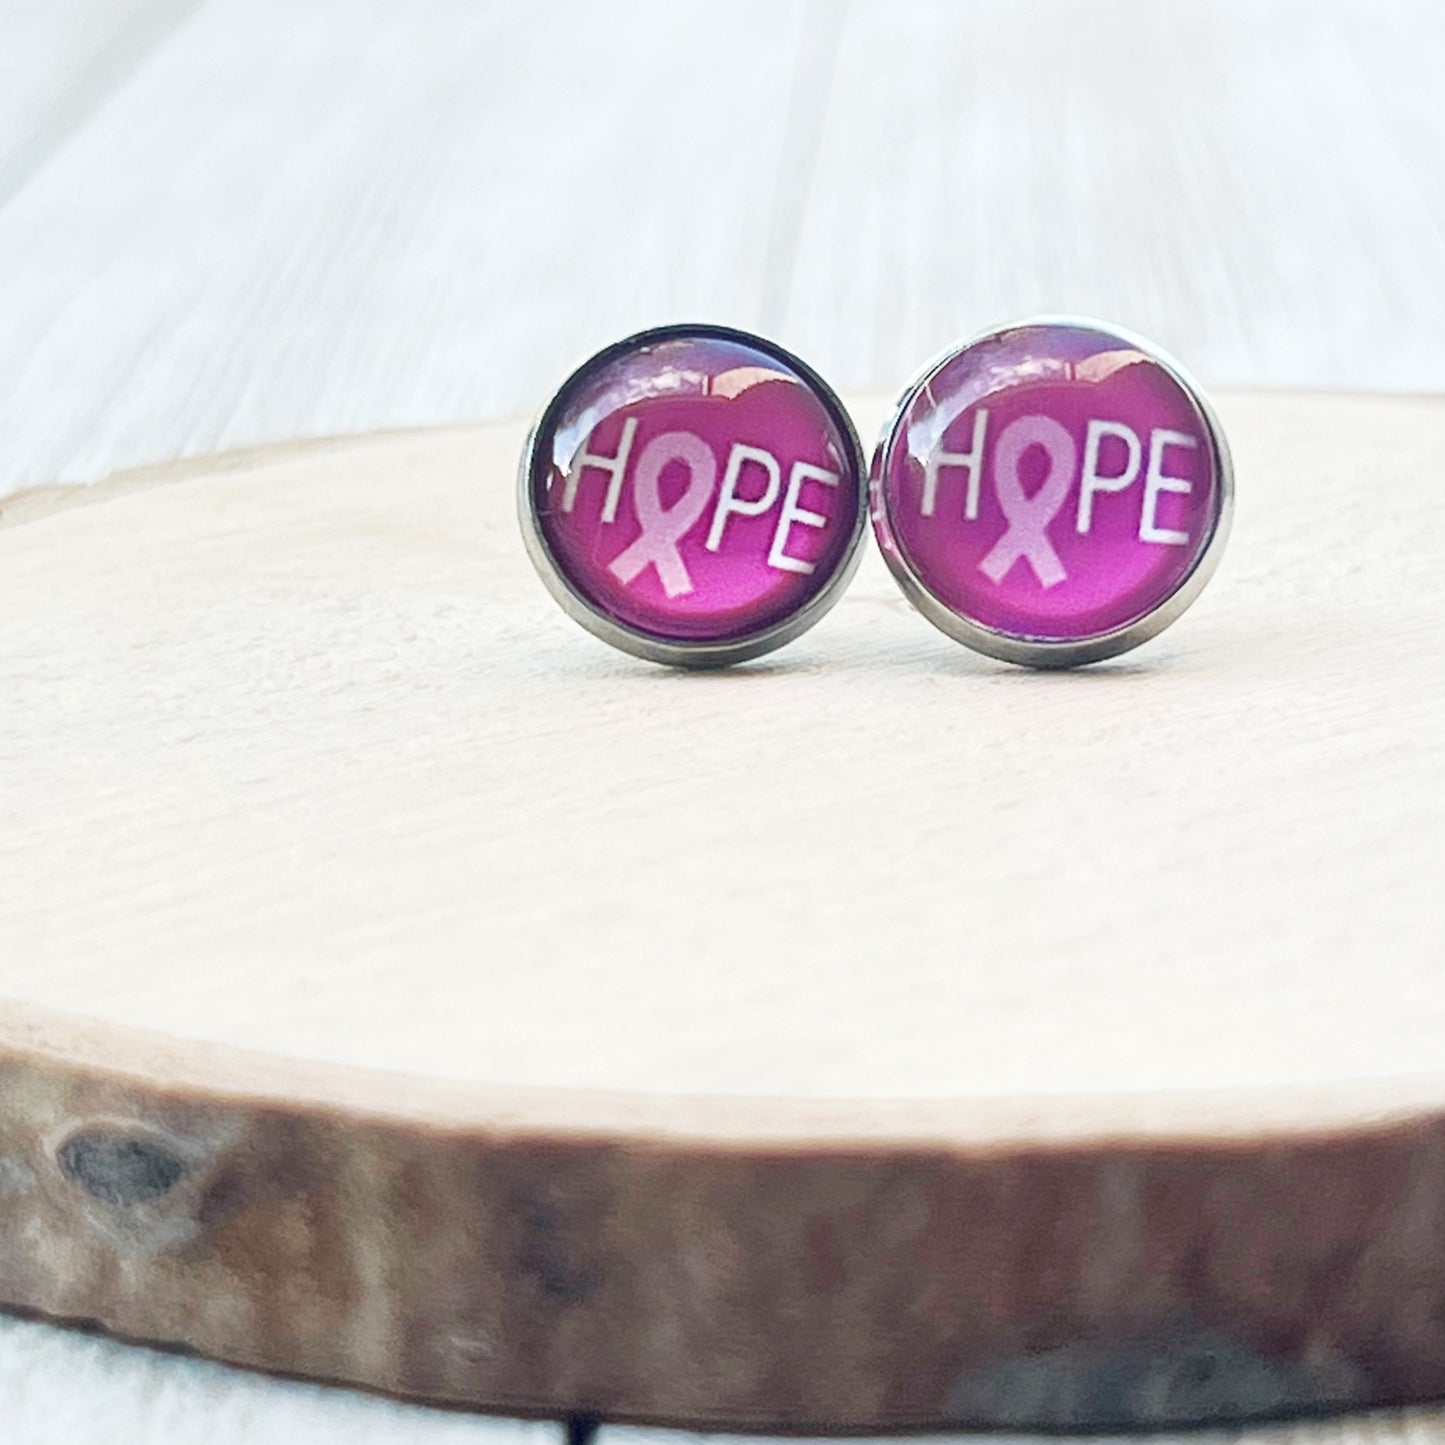 Breast Cancer Awareness 'Hope' Stud Earrings - Stylish & Meaningful Accessories